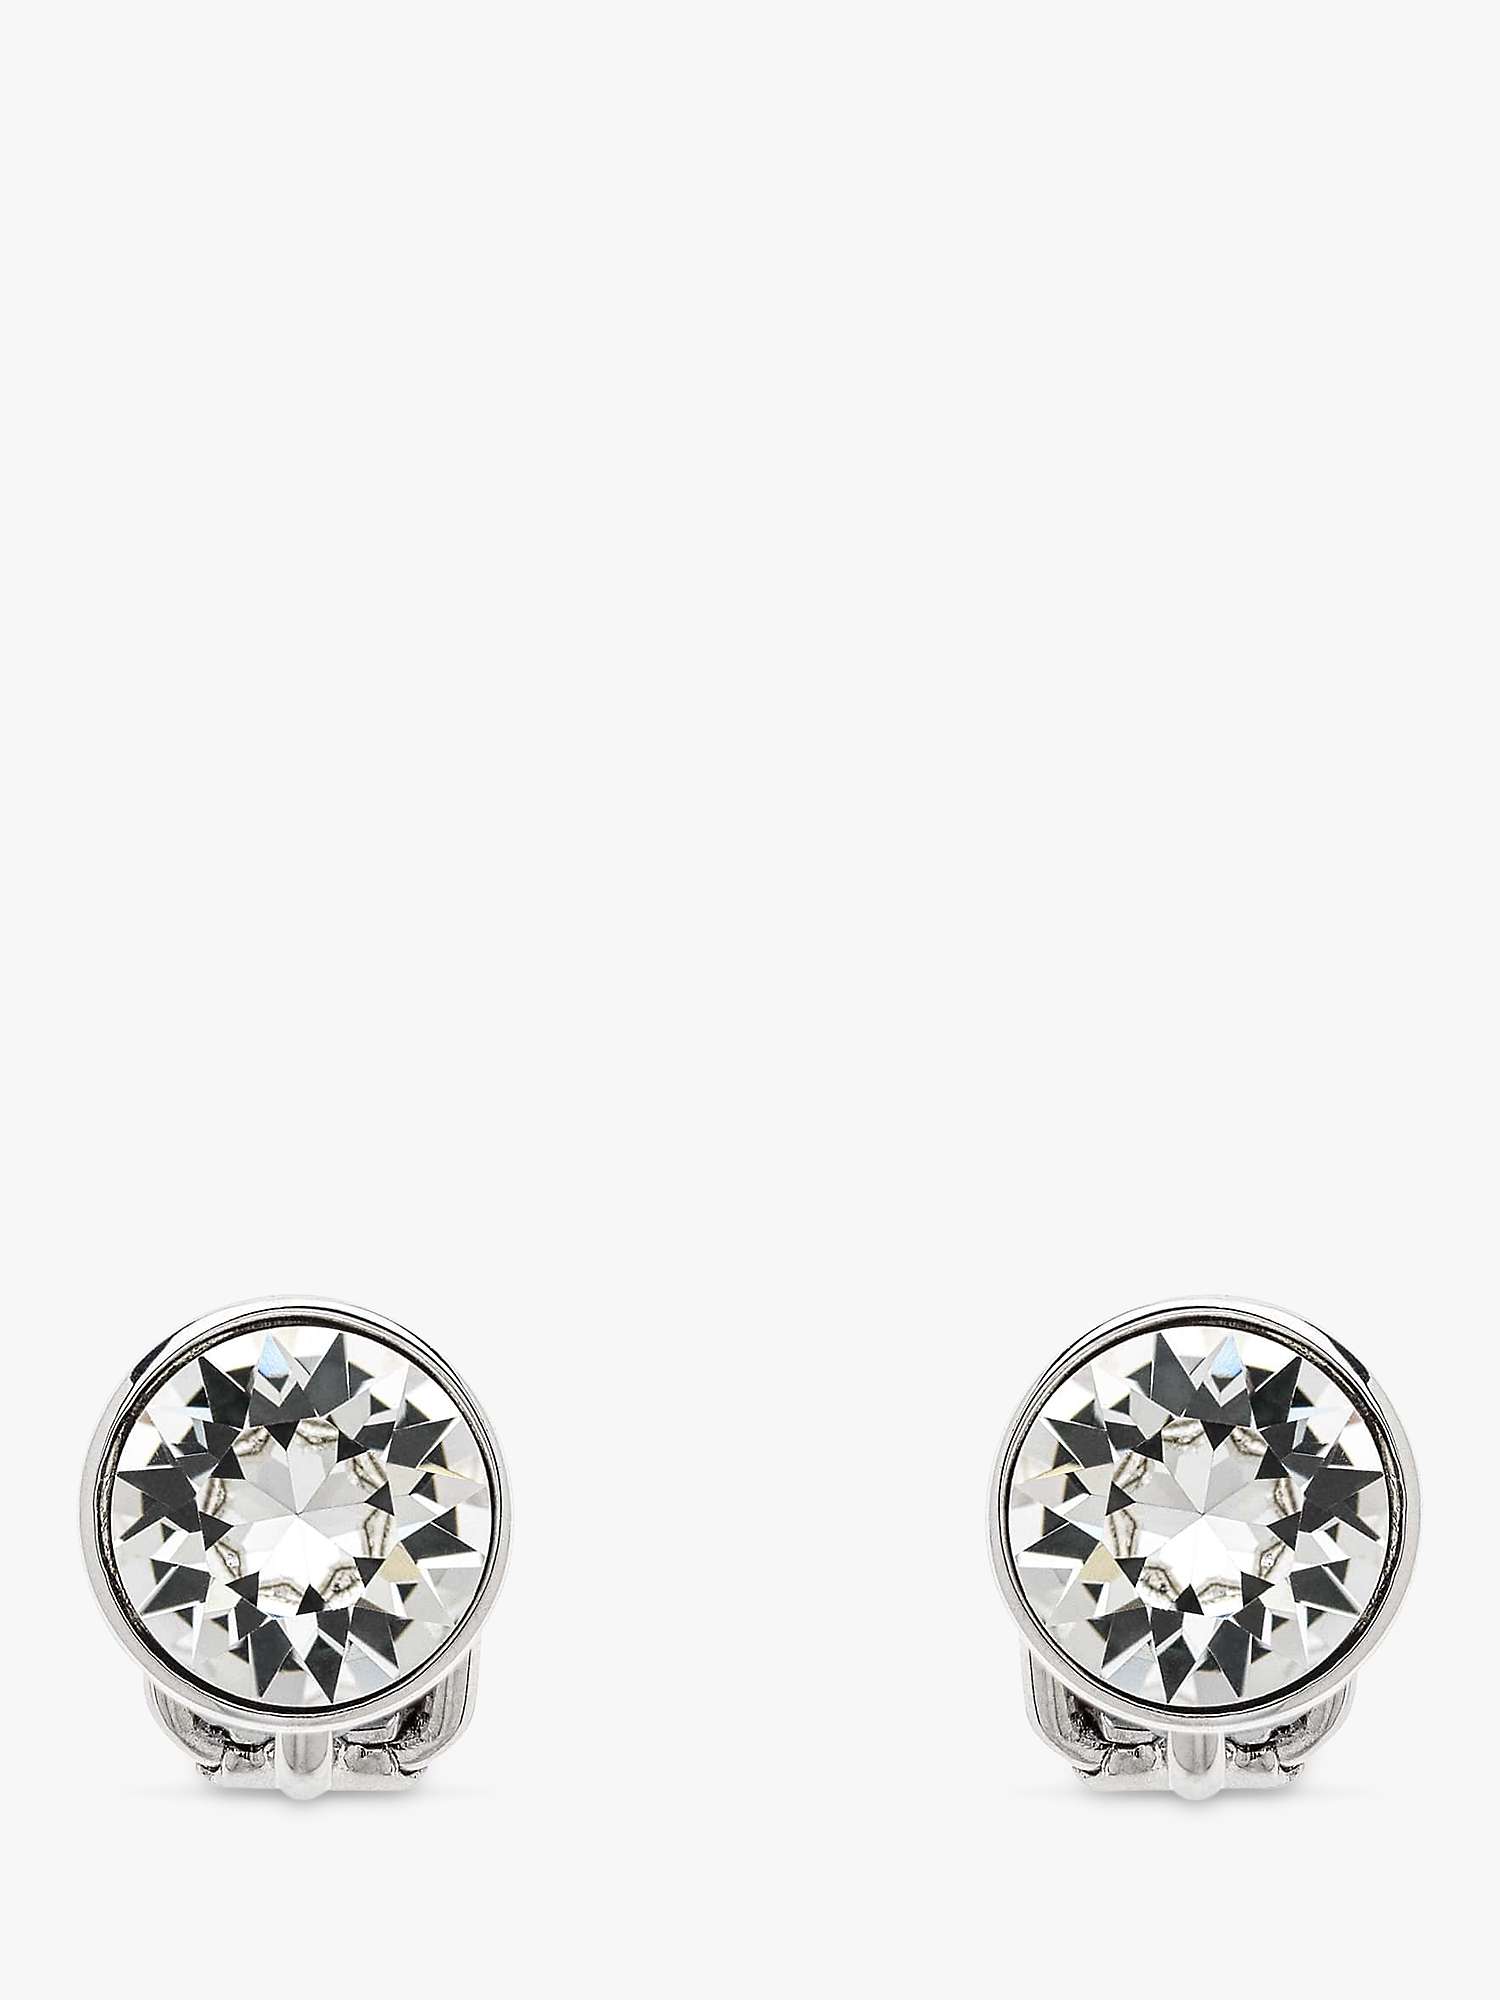 Buy Emma Holland Crystal Stud Clip-On Earrings, Silver Online at johnlewis.com